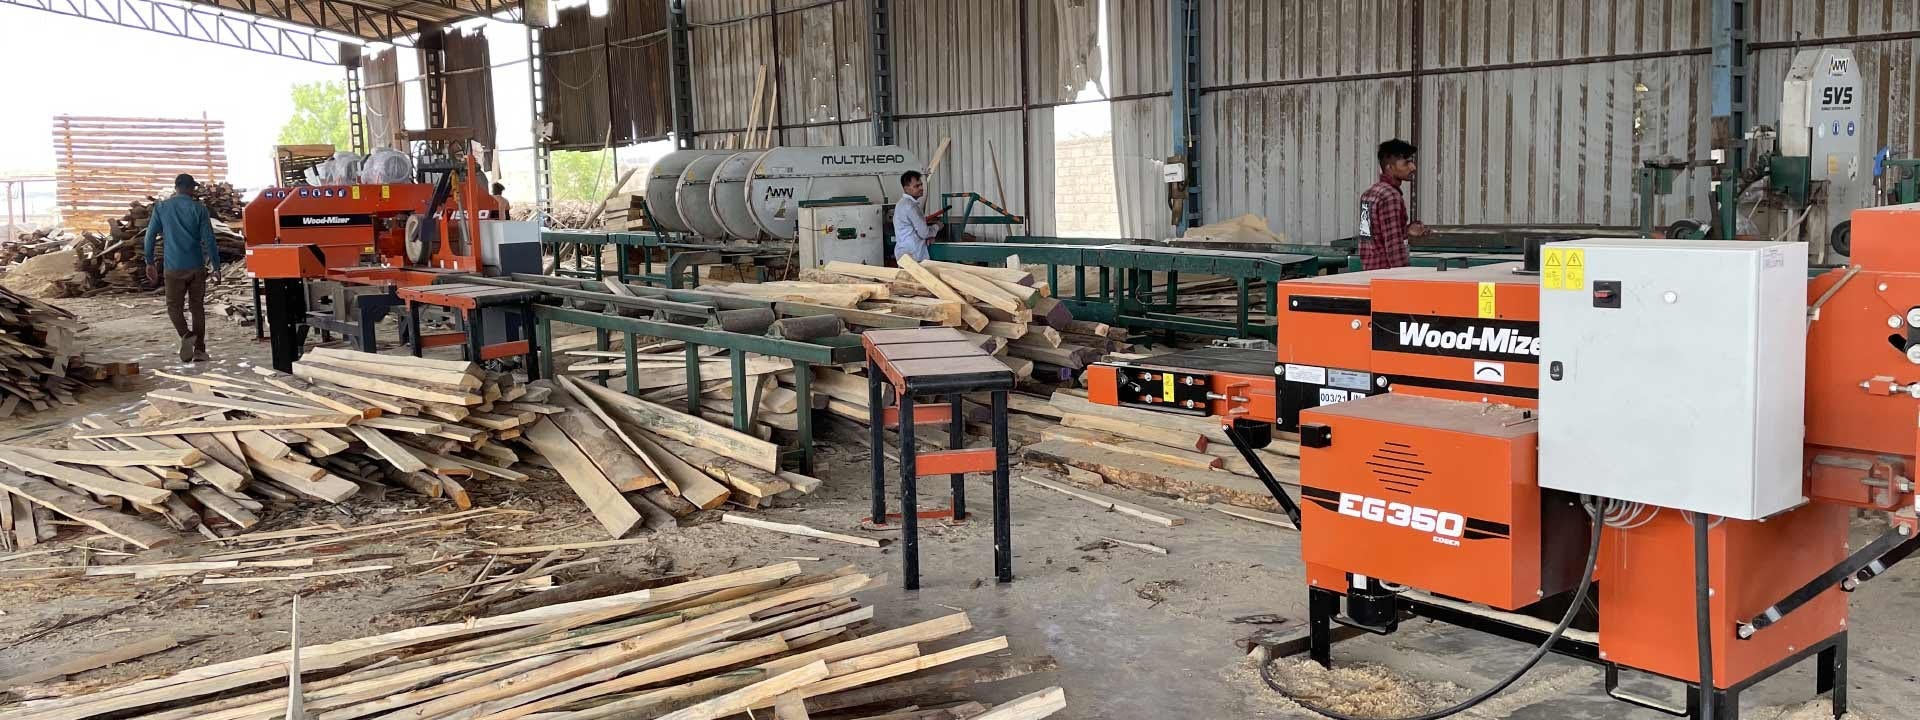 Sunder Lumbers Increases Production with Wood-Mizer in Gujarat, India 